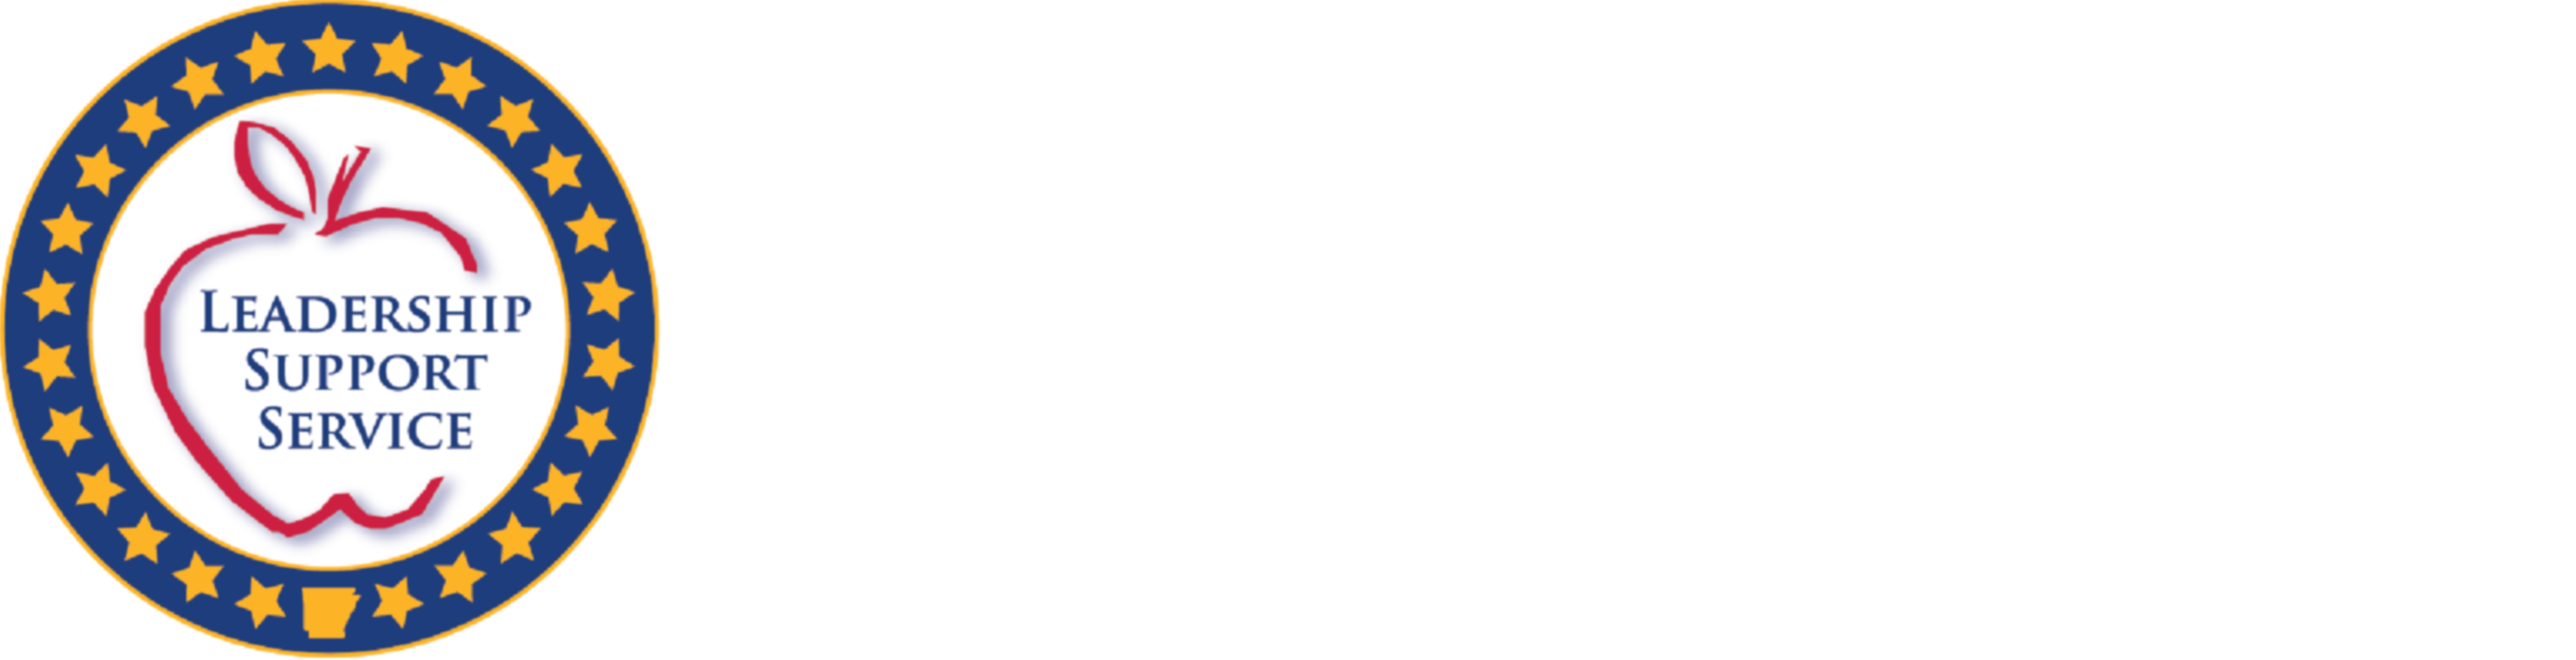 DESE State Required Information